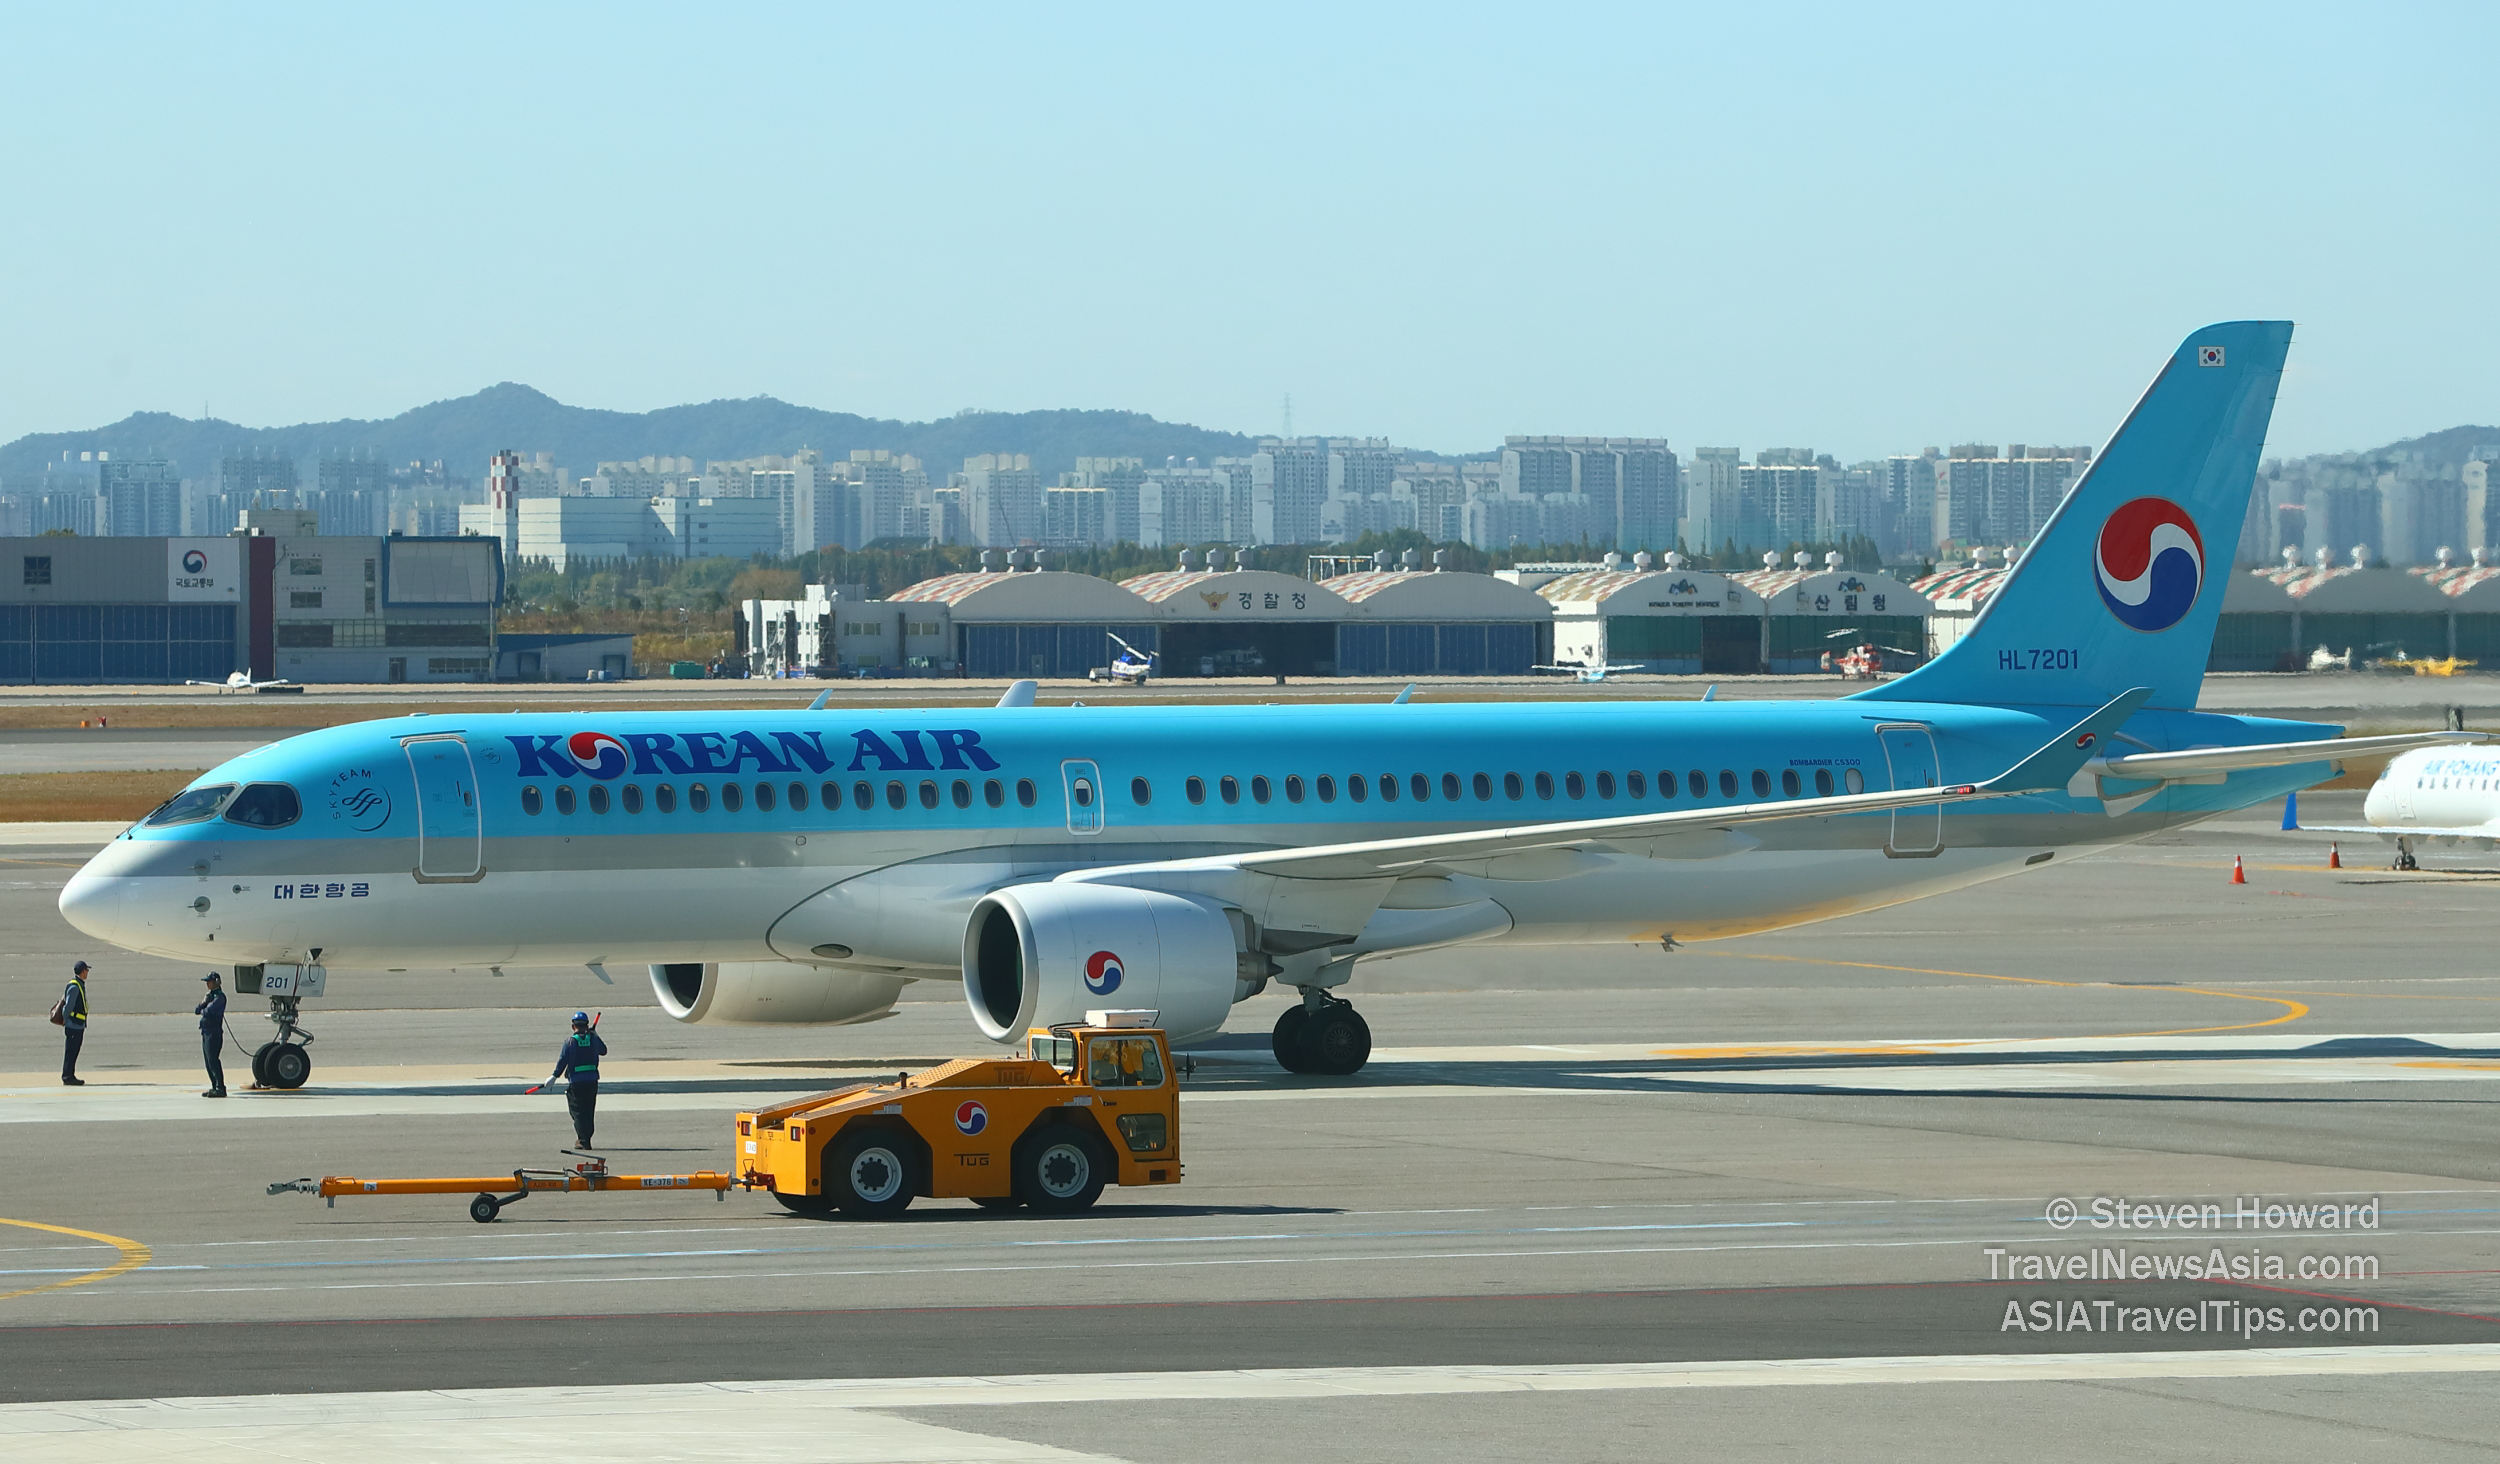 Korean Air Airbus A220-300 (formerly known as the Bombardier CS300) reg: HL7201. Picture by Steven Howard of TravelNewsAsia.com Click to enlarge.